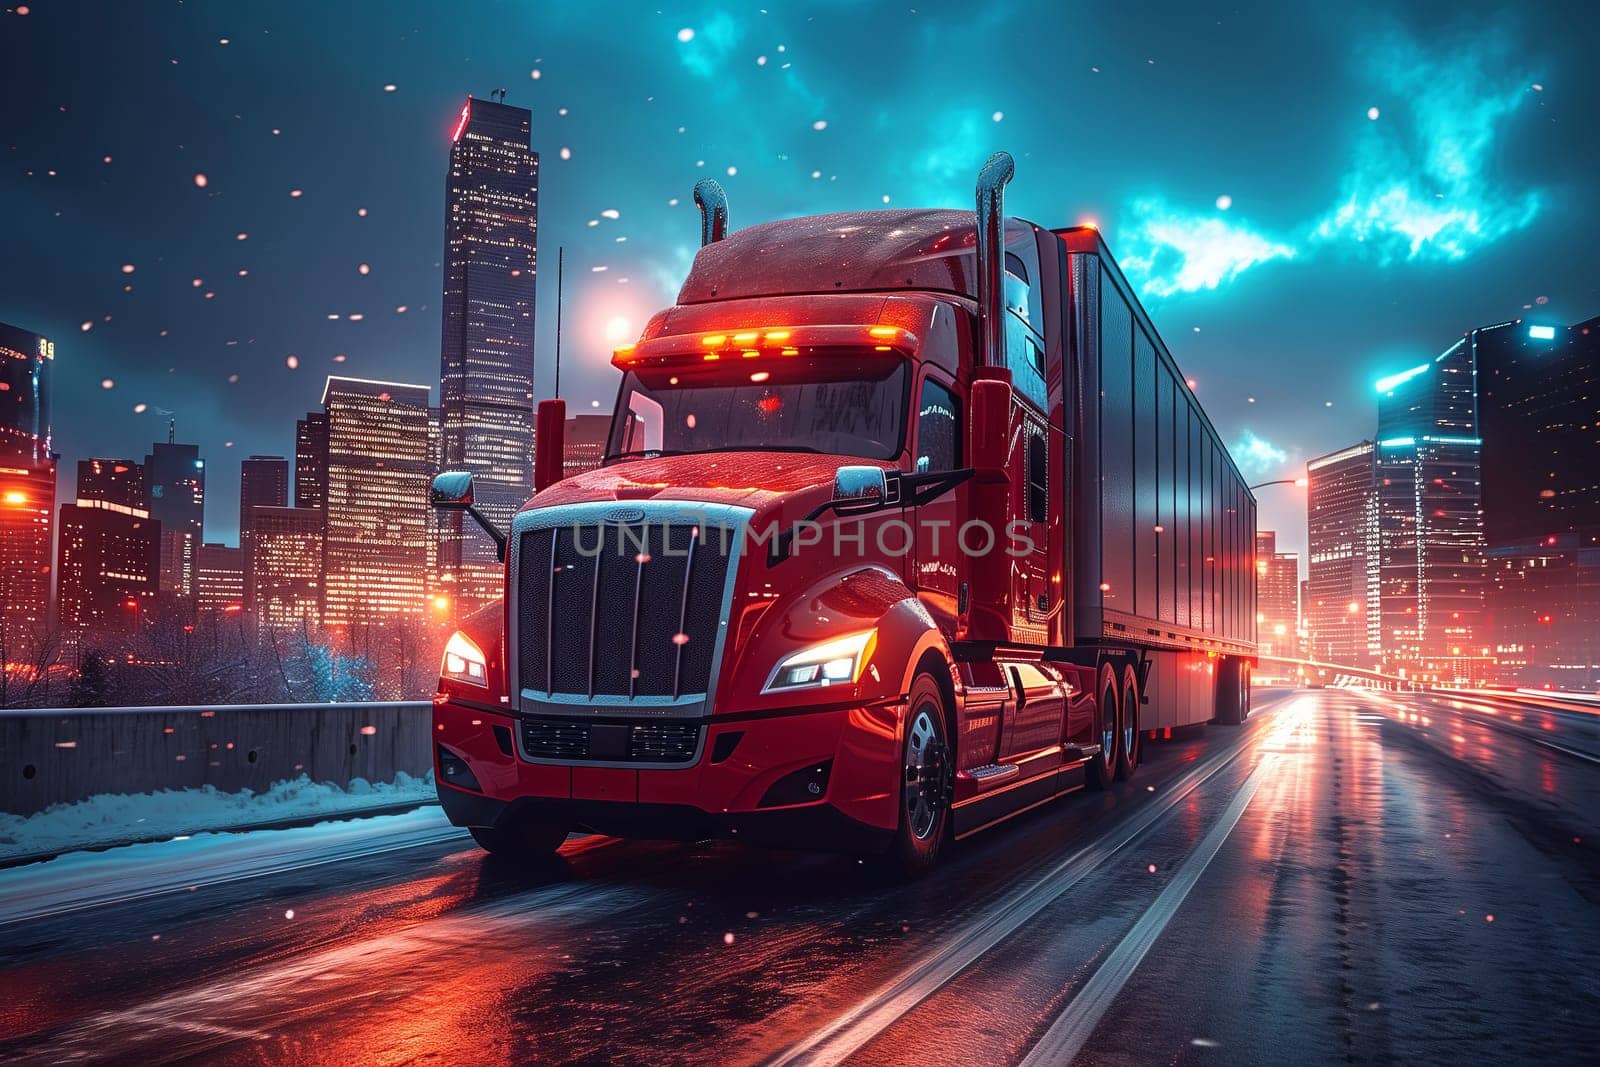 A red semi truck with bright automotive lighting is moving along a snowcovered highway under a starry sky at night